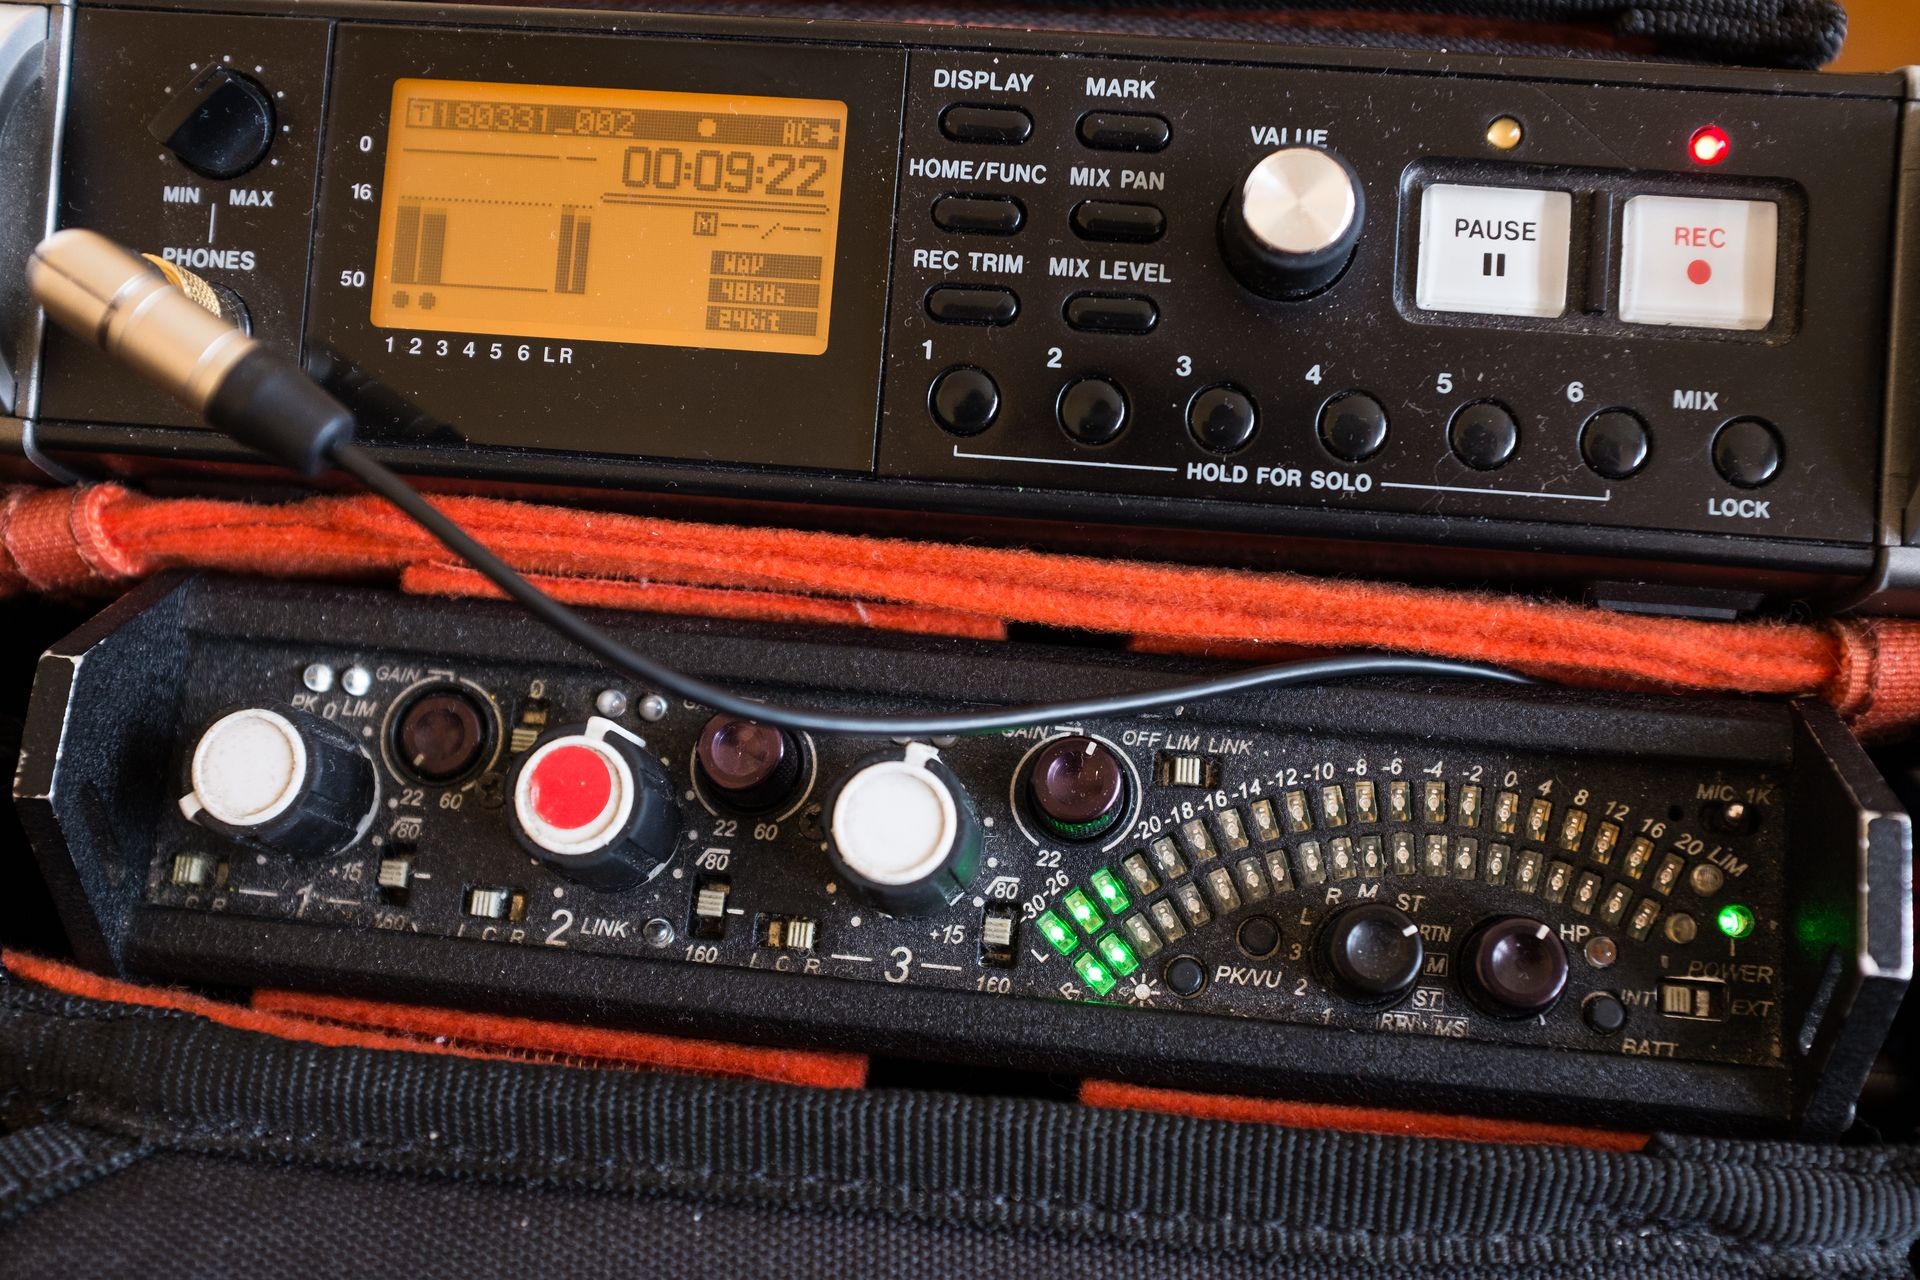 Audio recording kit, sound mixer and recorder in a portable bag, red REC button on and green stereo led peak meter illuminated